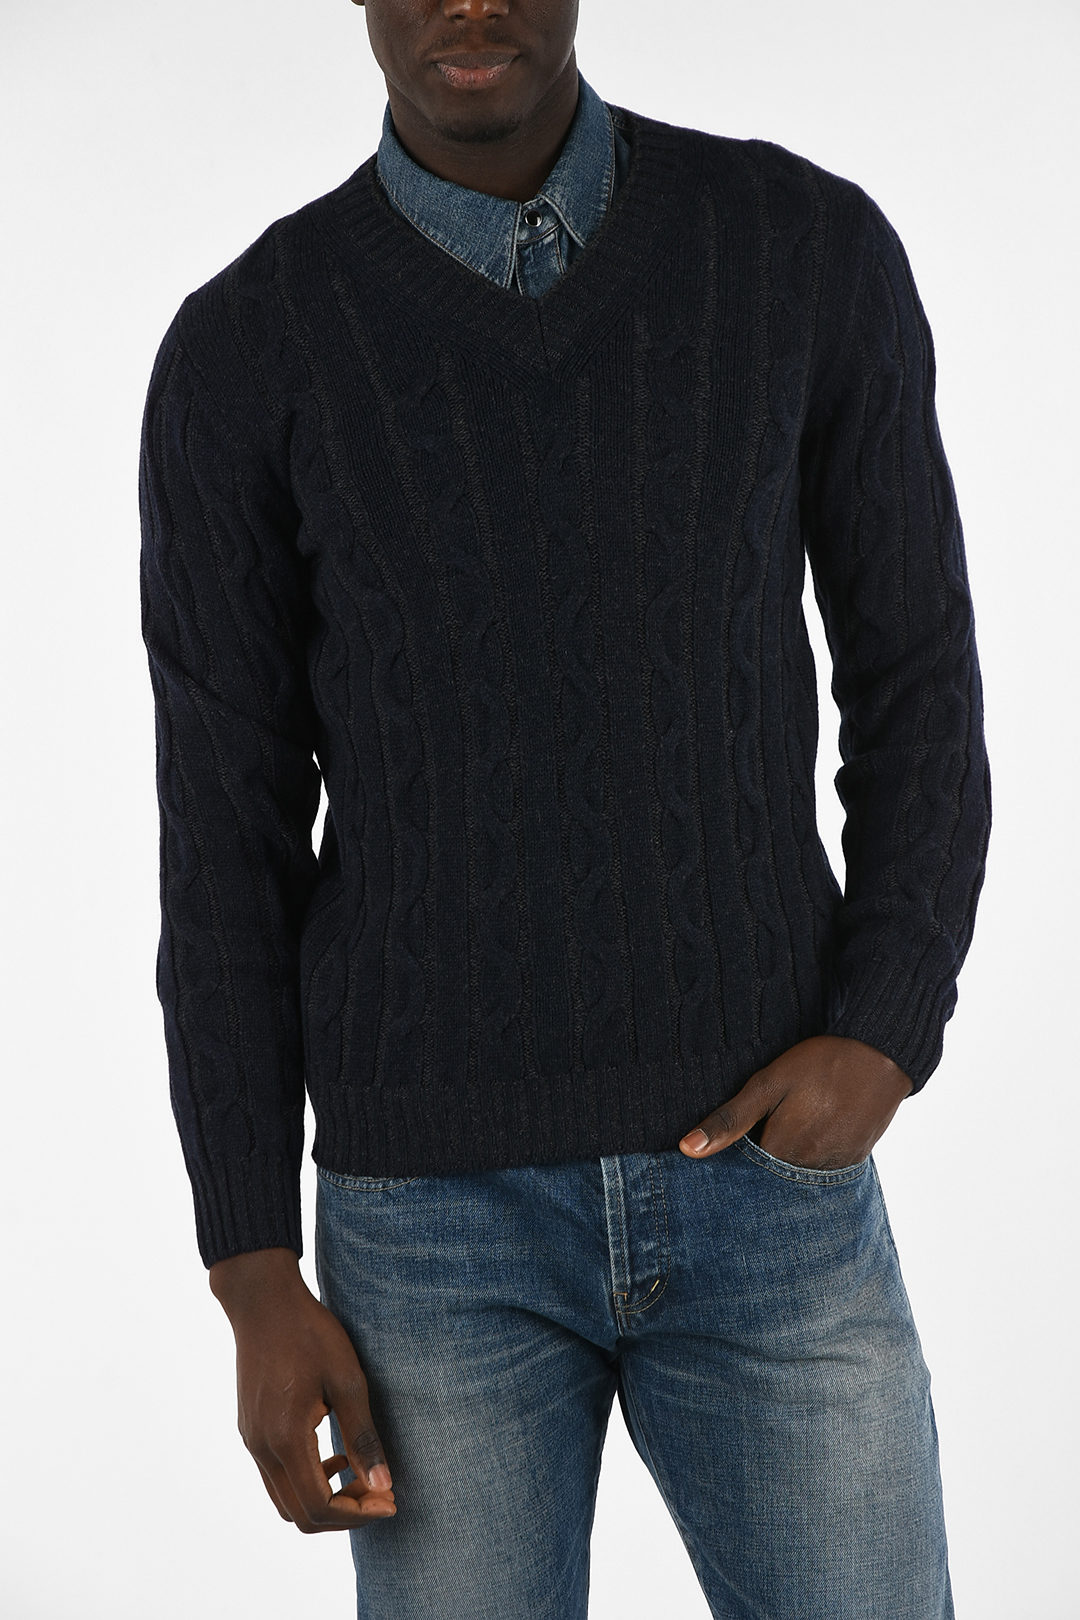 Settefili Cashmere Wool and Cashmere Cable Knit V-Neck Sweater men -  Glamood Outlet